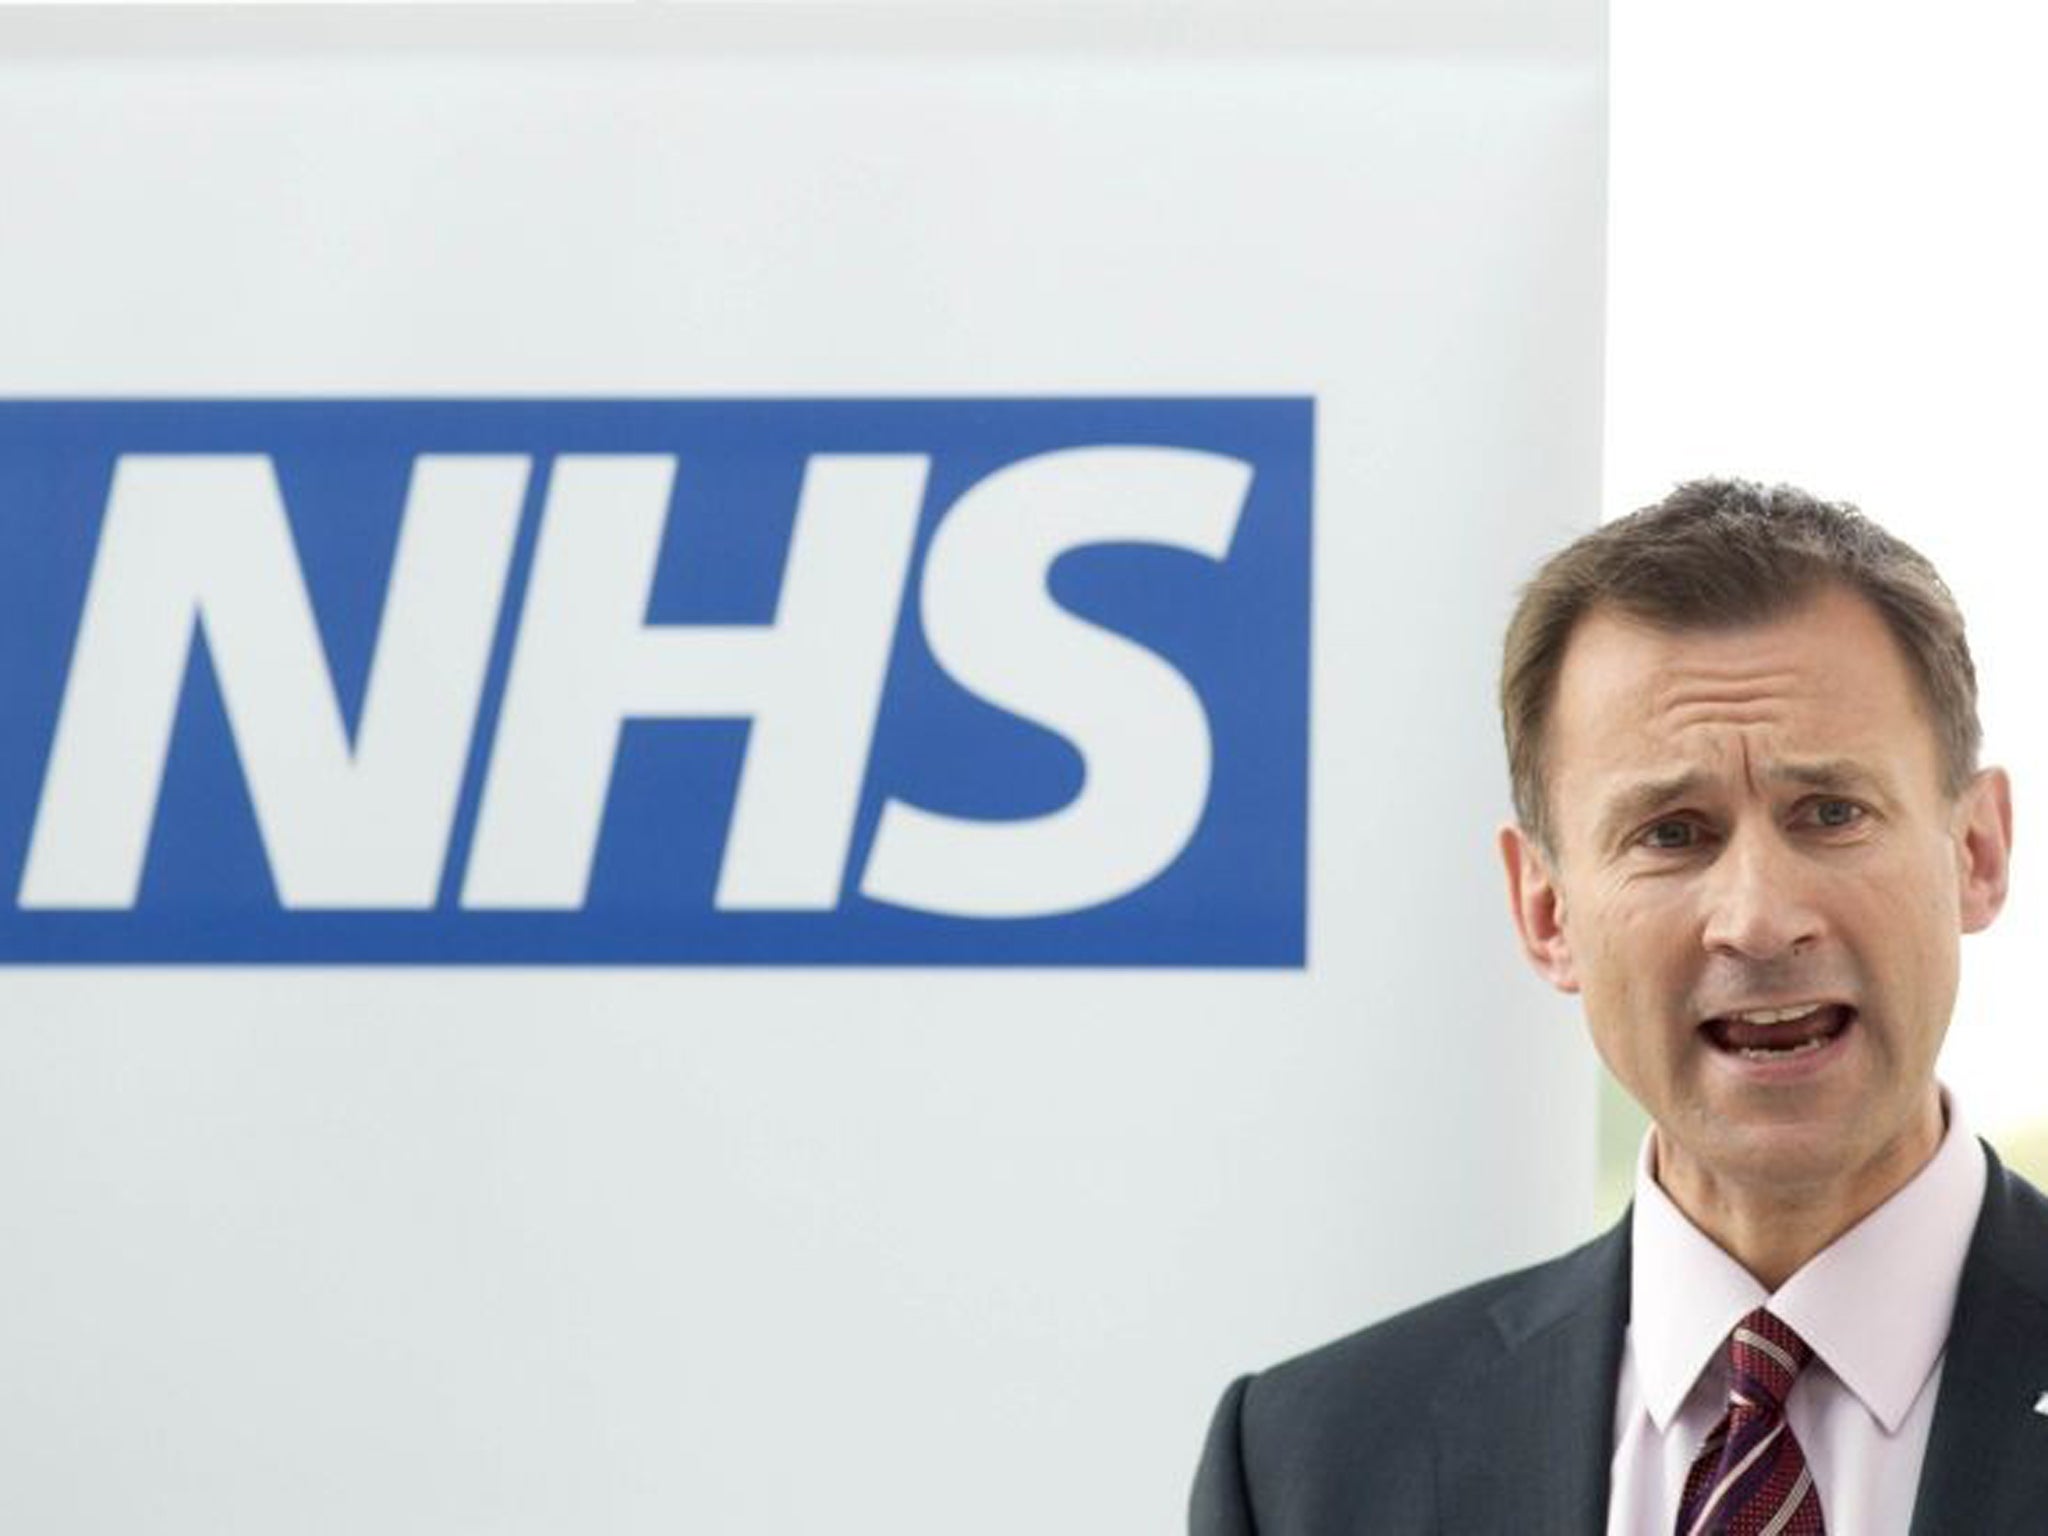 Health Secretary Jeremy Hunt also announced there would be a national black list of failing hospital bosses and proposed a 'statutory duty of candour' for NHS providers so patients are fully informed when something goes wrong with their care